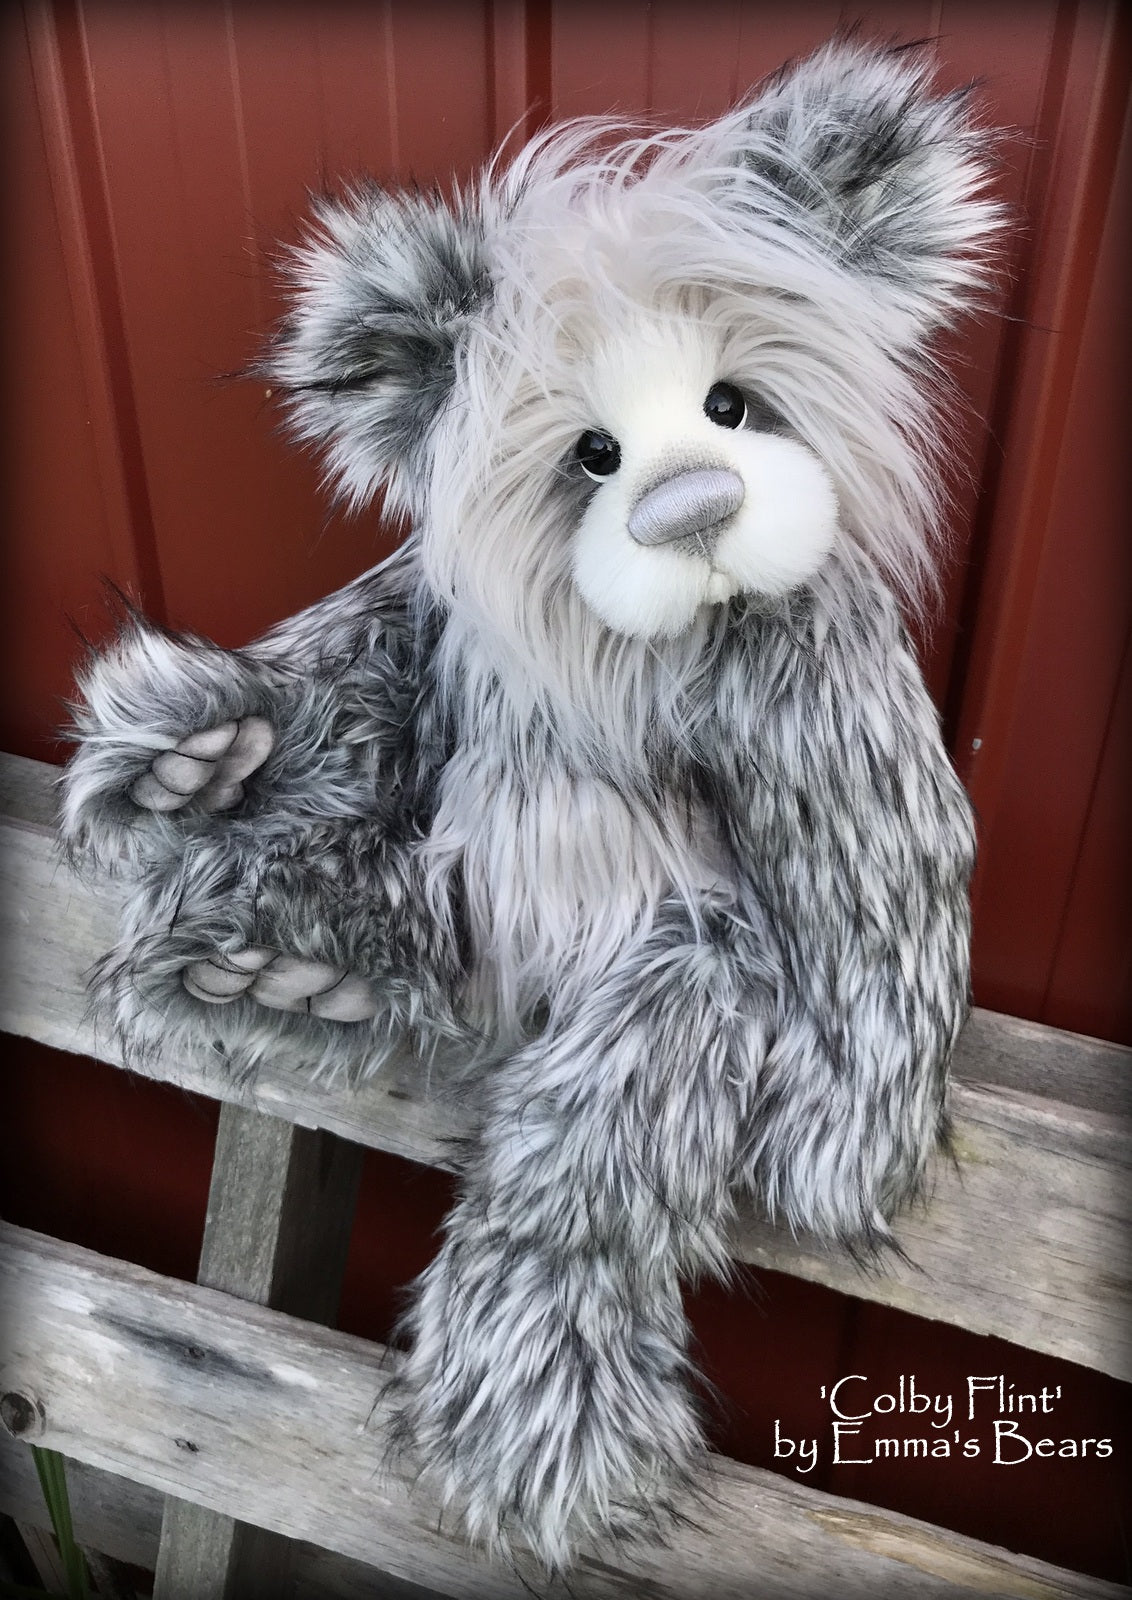 Toddler Colby Flint - 21in faux fur and alpaca Artist toddler style Bear by Emma's Bears - OOAK